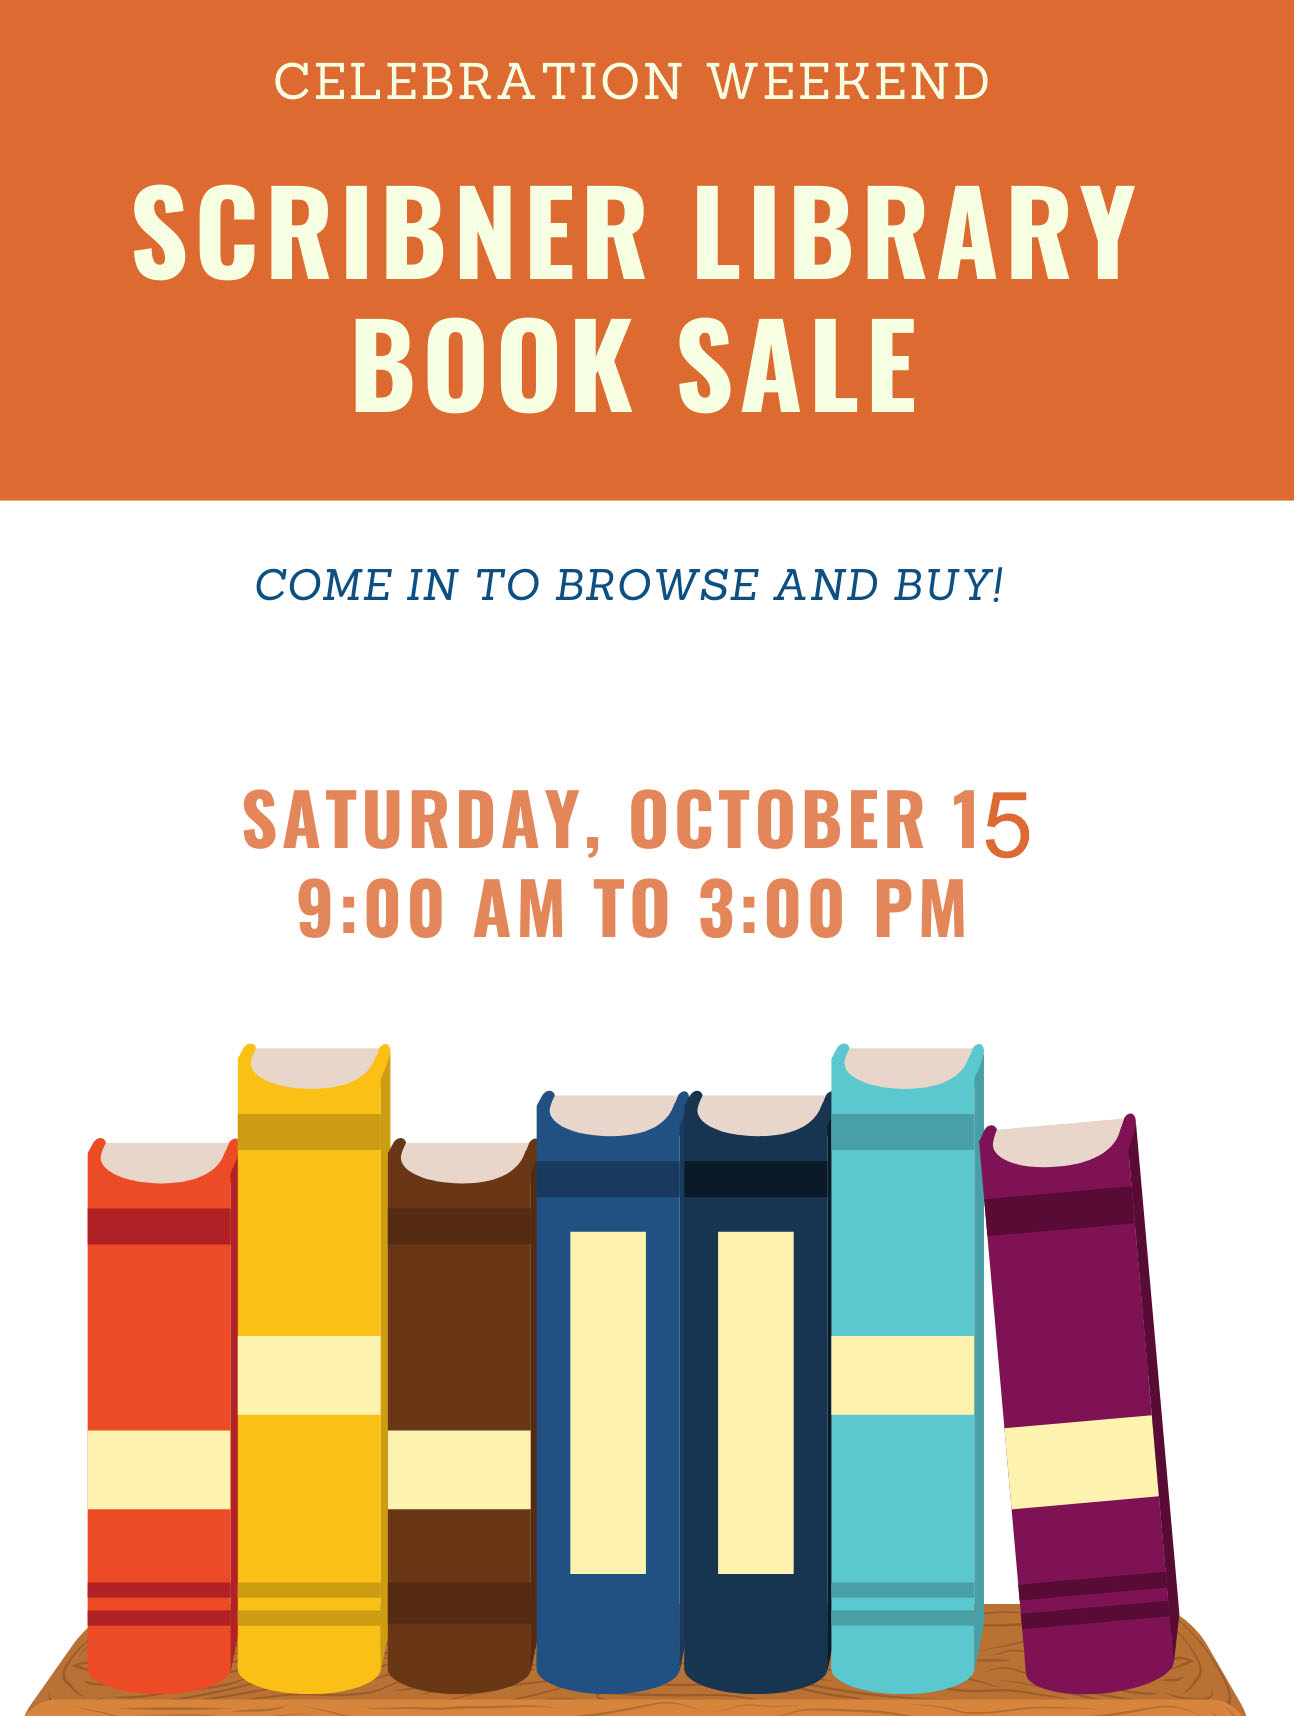 The Scribner Library book sale will be held from 9am to 3pm on Saturday, October 15 2022.